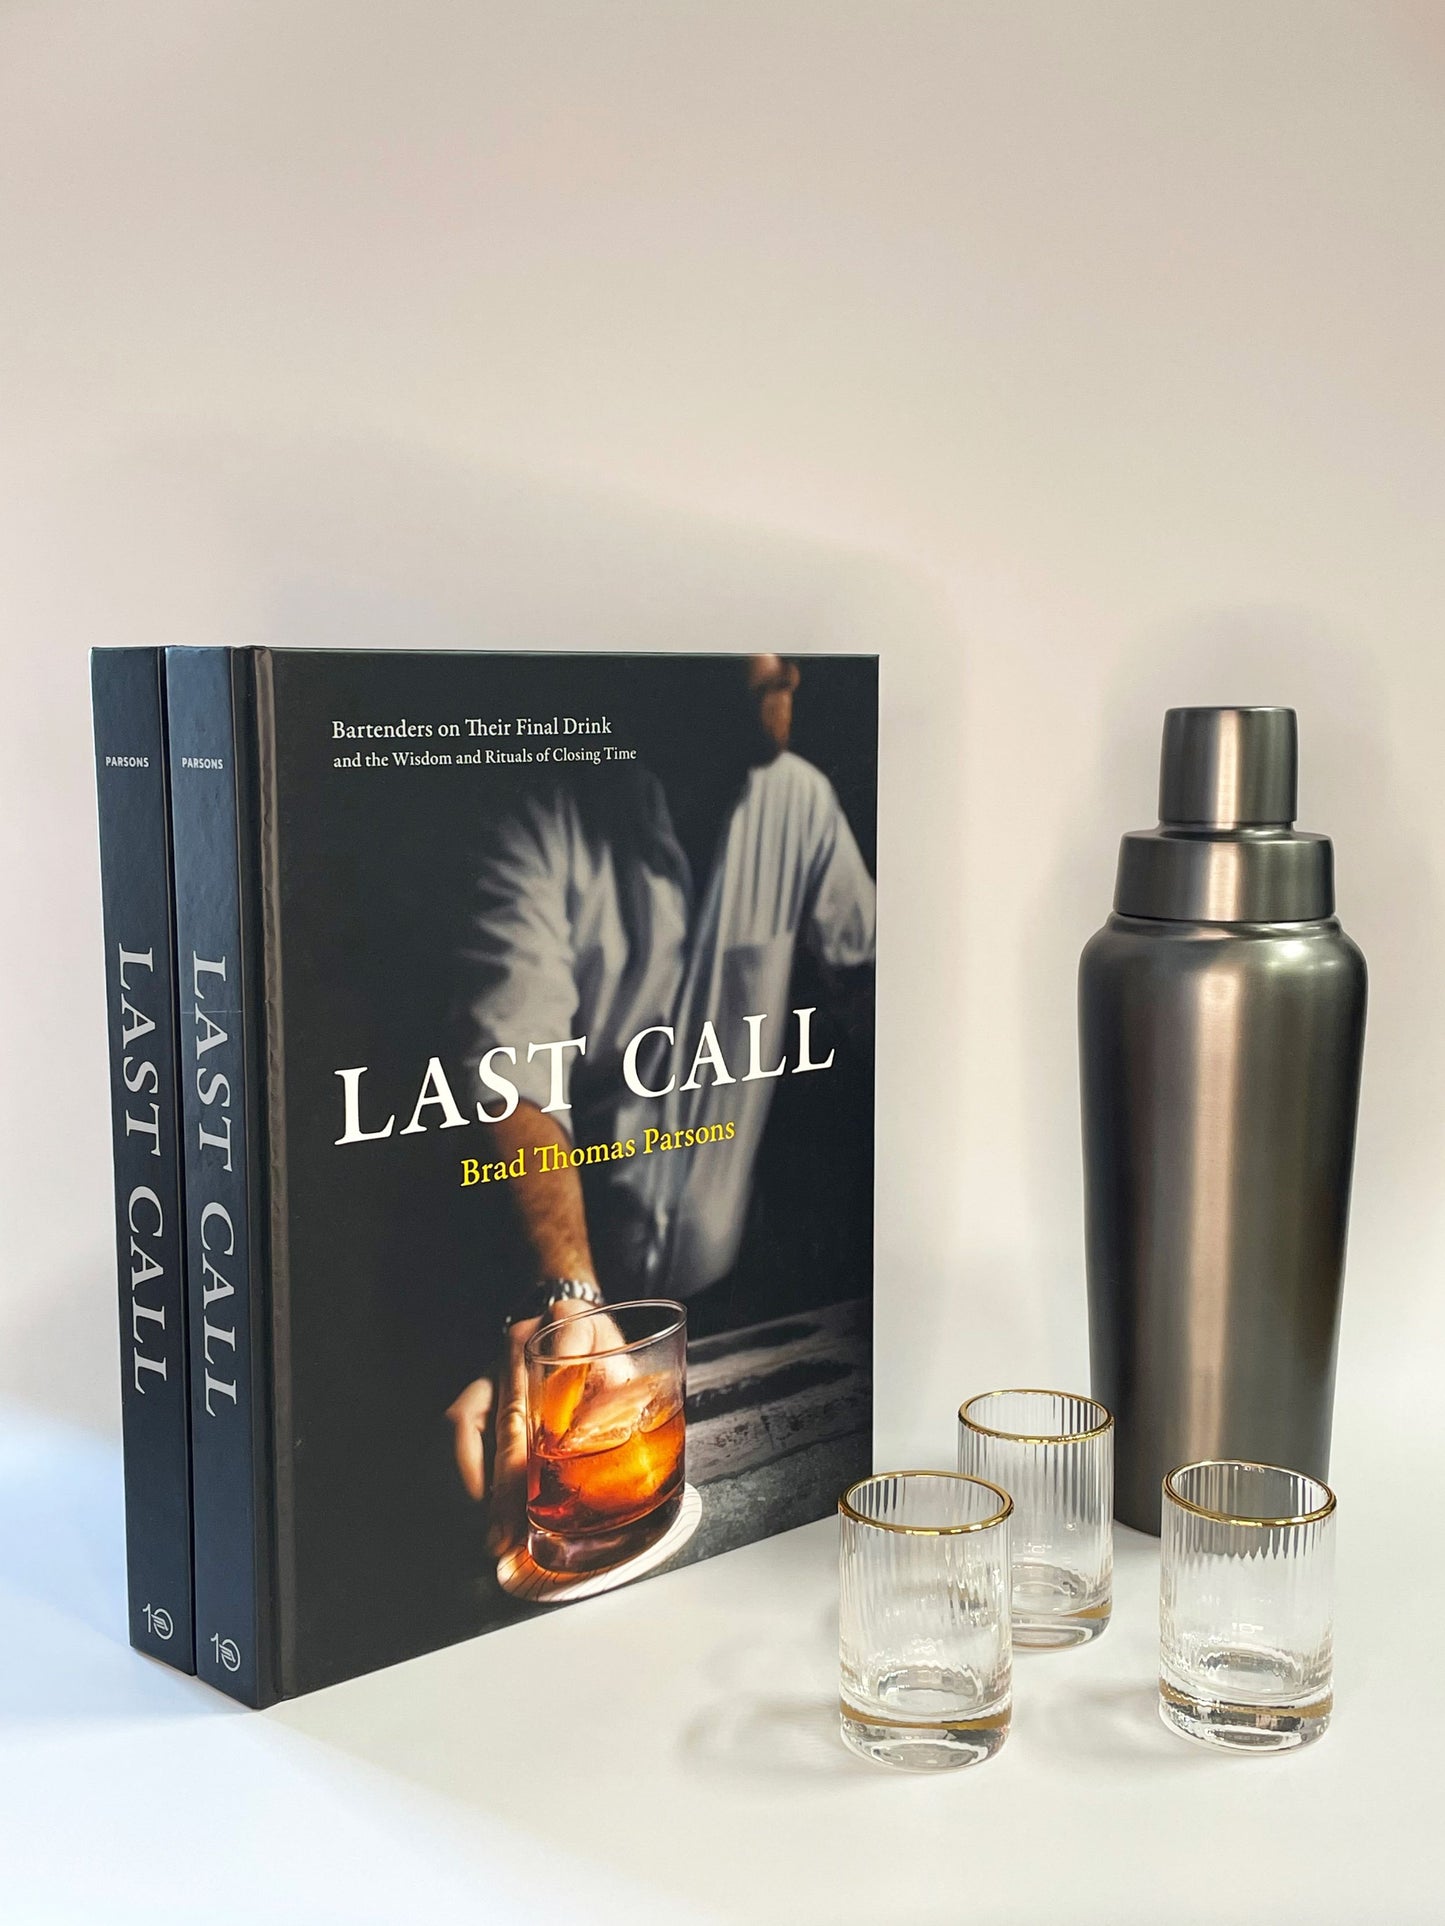 Last Call book by Brad Thomas Parsons with shaker bottle